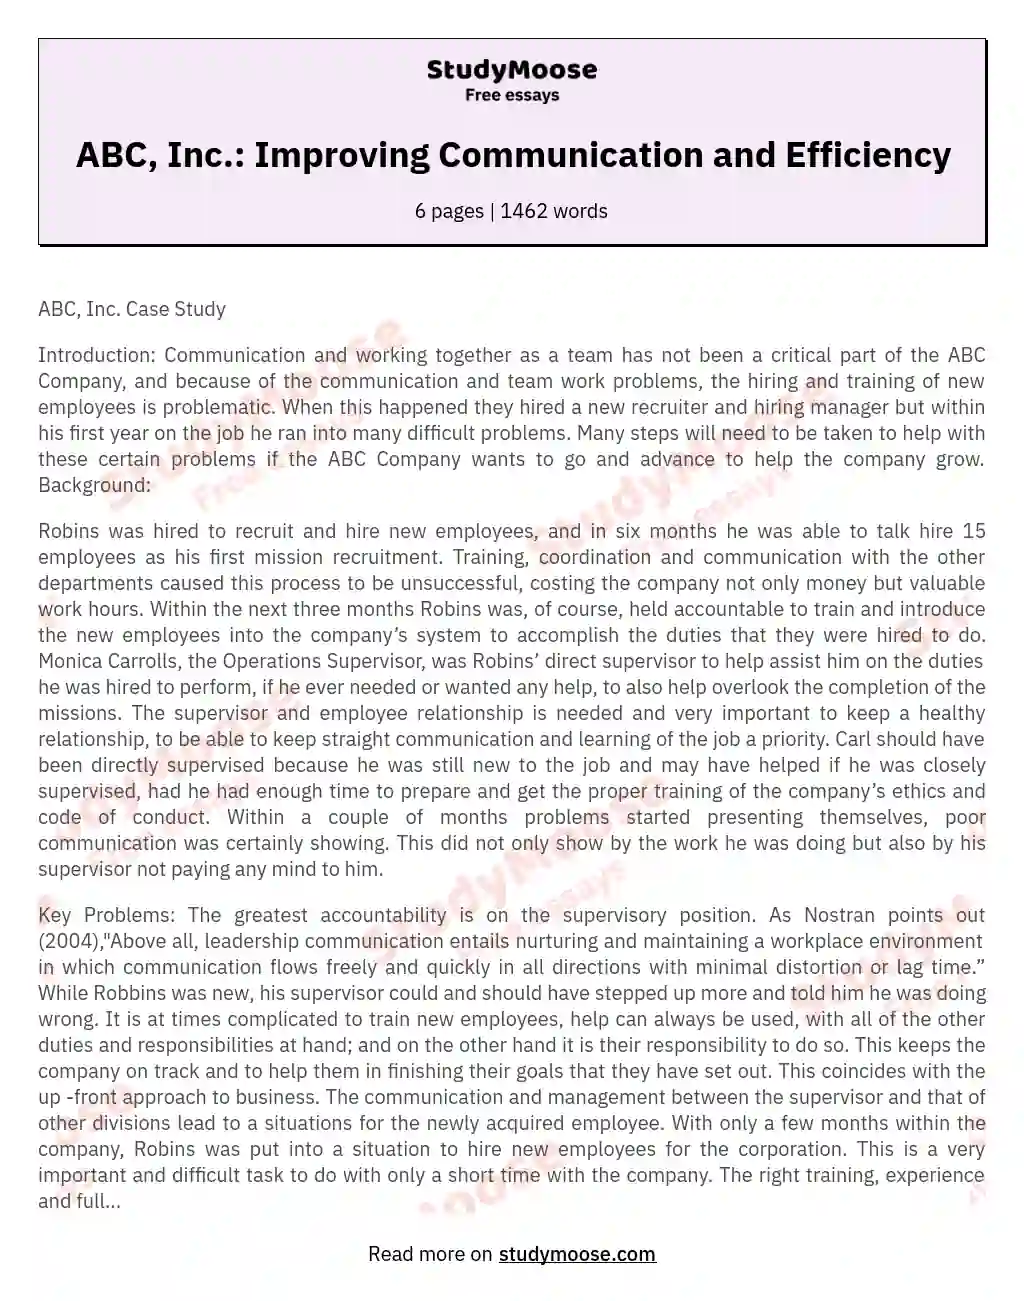 ABC, Inc.: Improving Communication and Efficiency essay